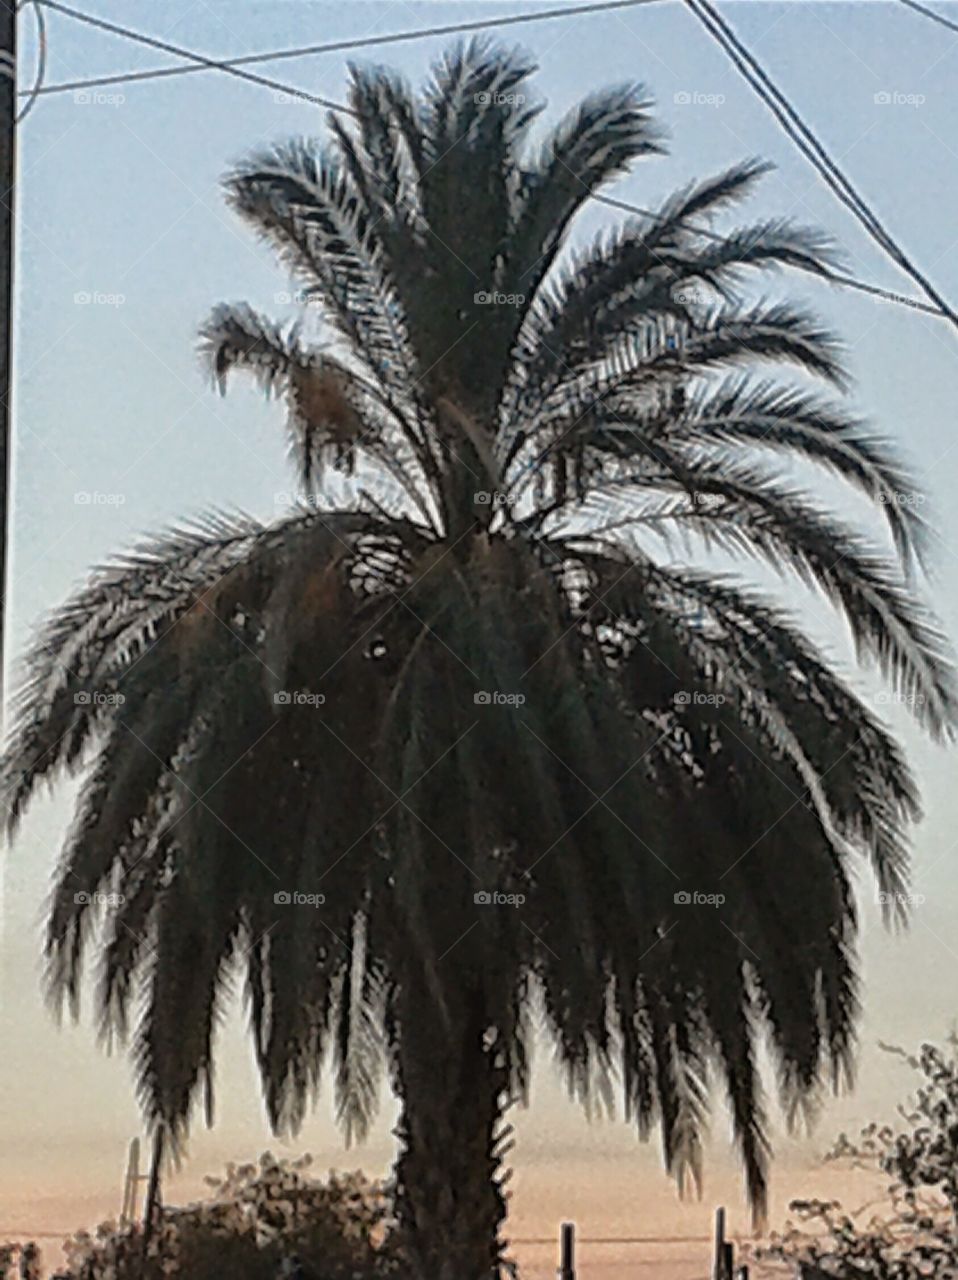 Natures Sparkler. palms always remind me of 4th of July fireworks when the sun is on the leaves just right, nature made.